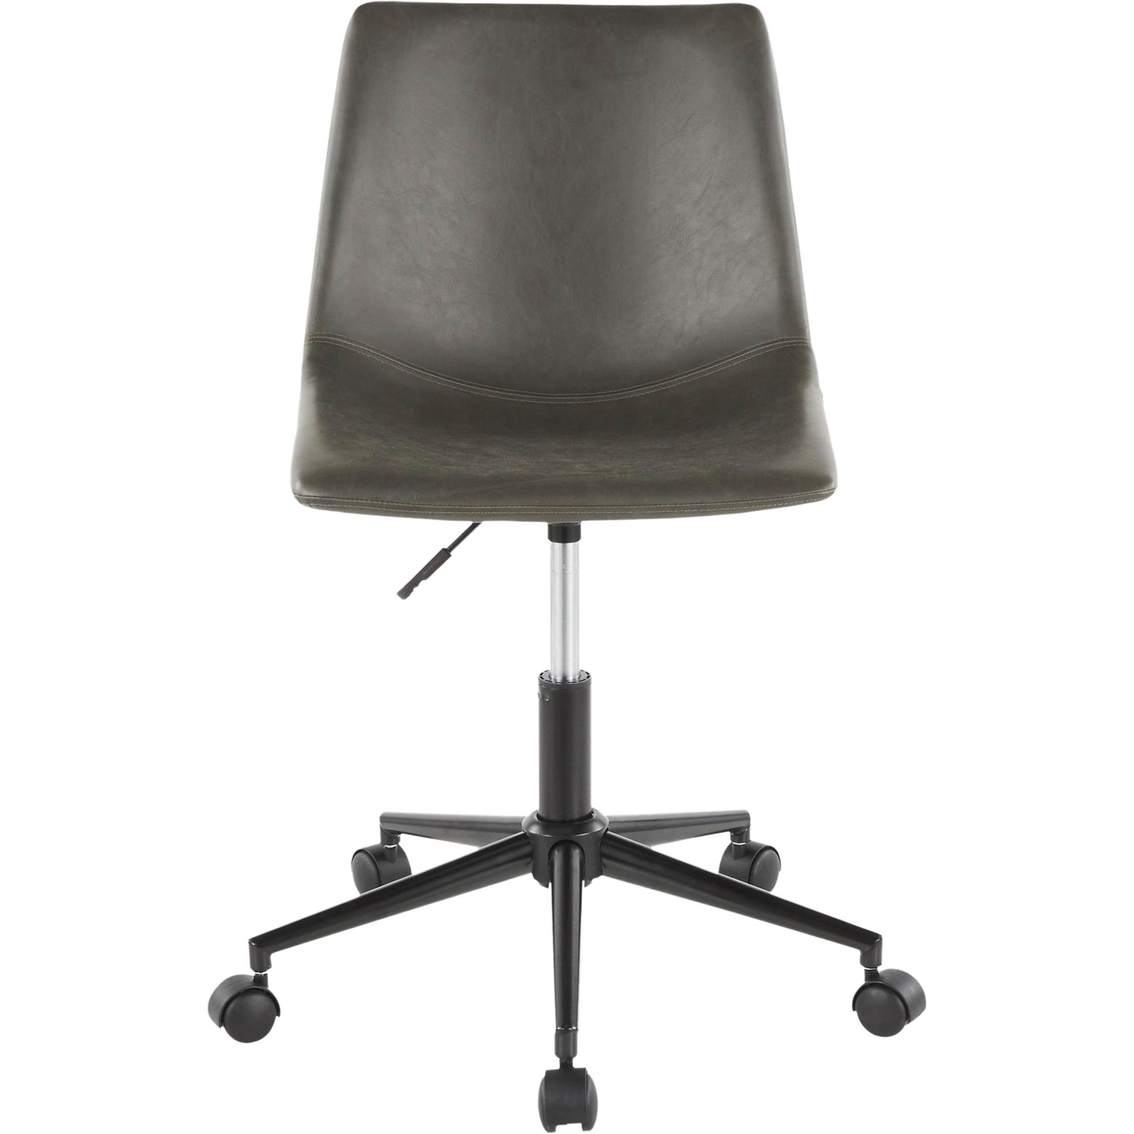 LumiSource Duke Task Industrial Chair - Image 3 of 6